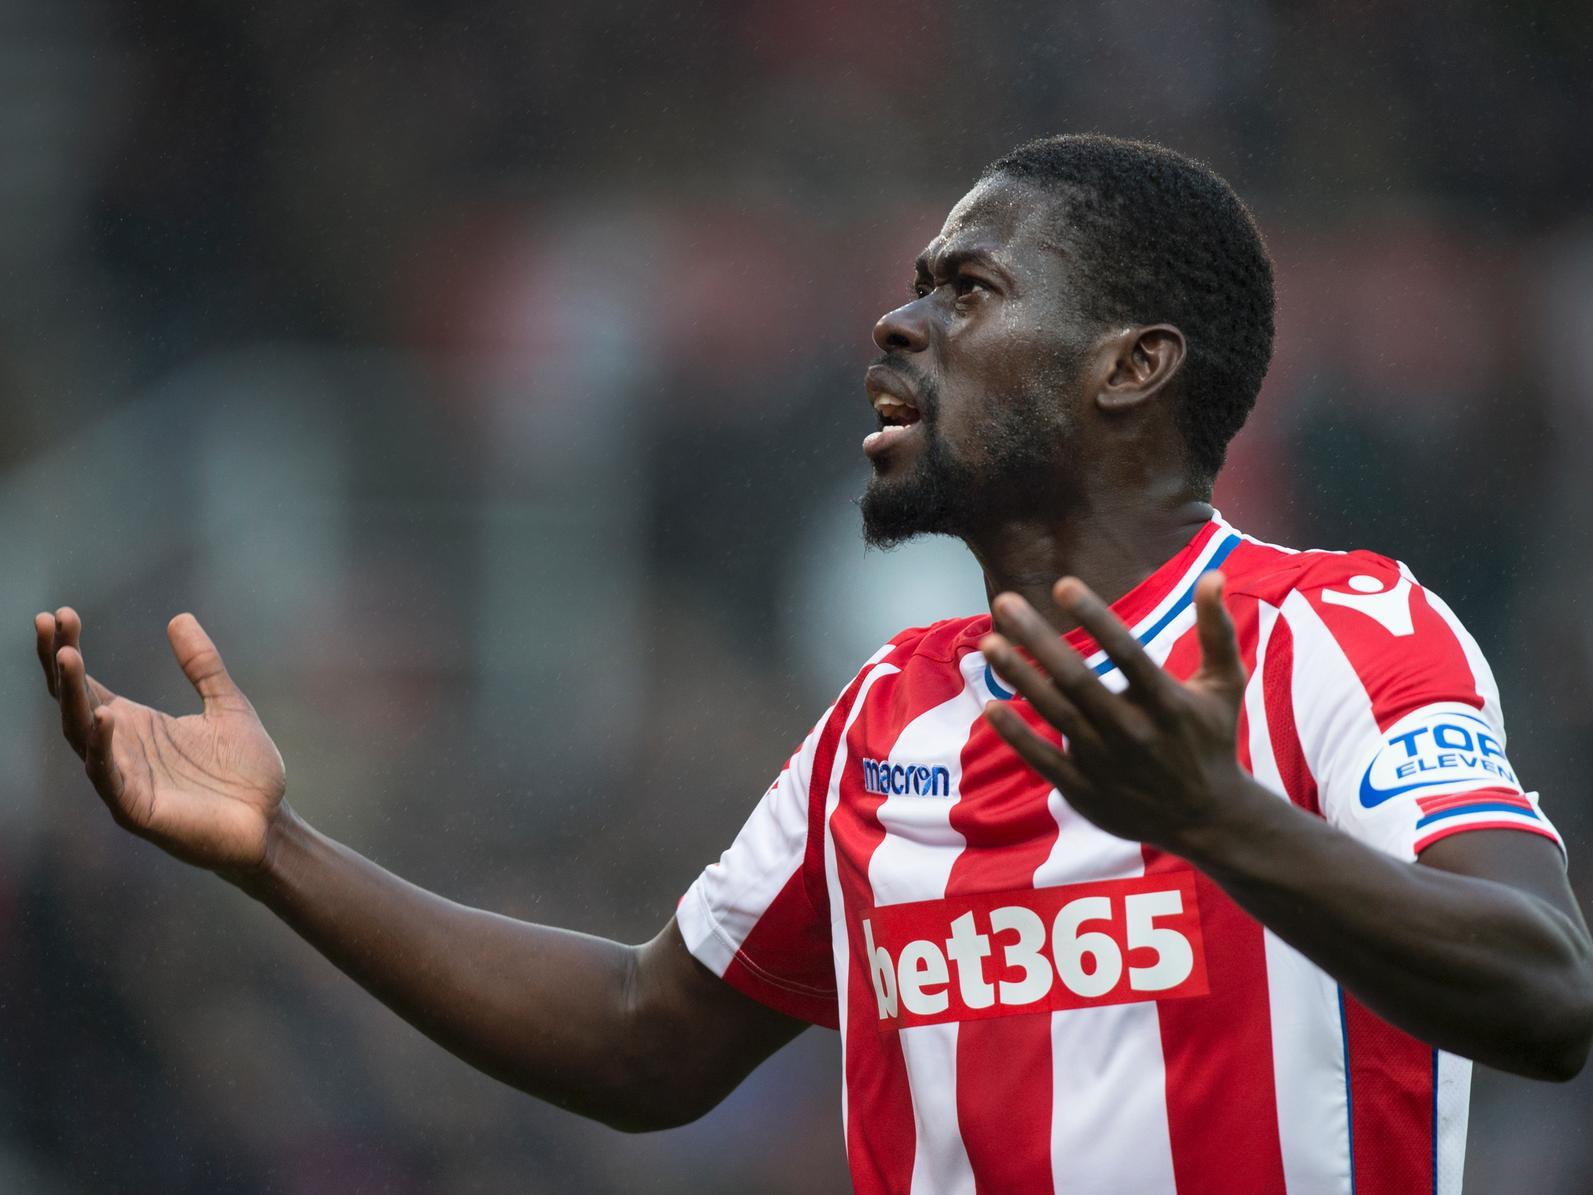 Turkish side Trabzonspor are looking to escalate their interest in Stoke City midfielder Badou Ndiaye, and are believed to have now contacted the club in an attempt to secure a January loan deal. (Sport Witness)